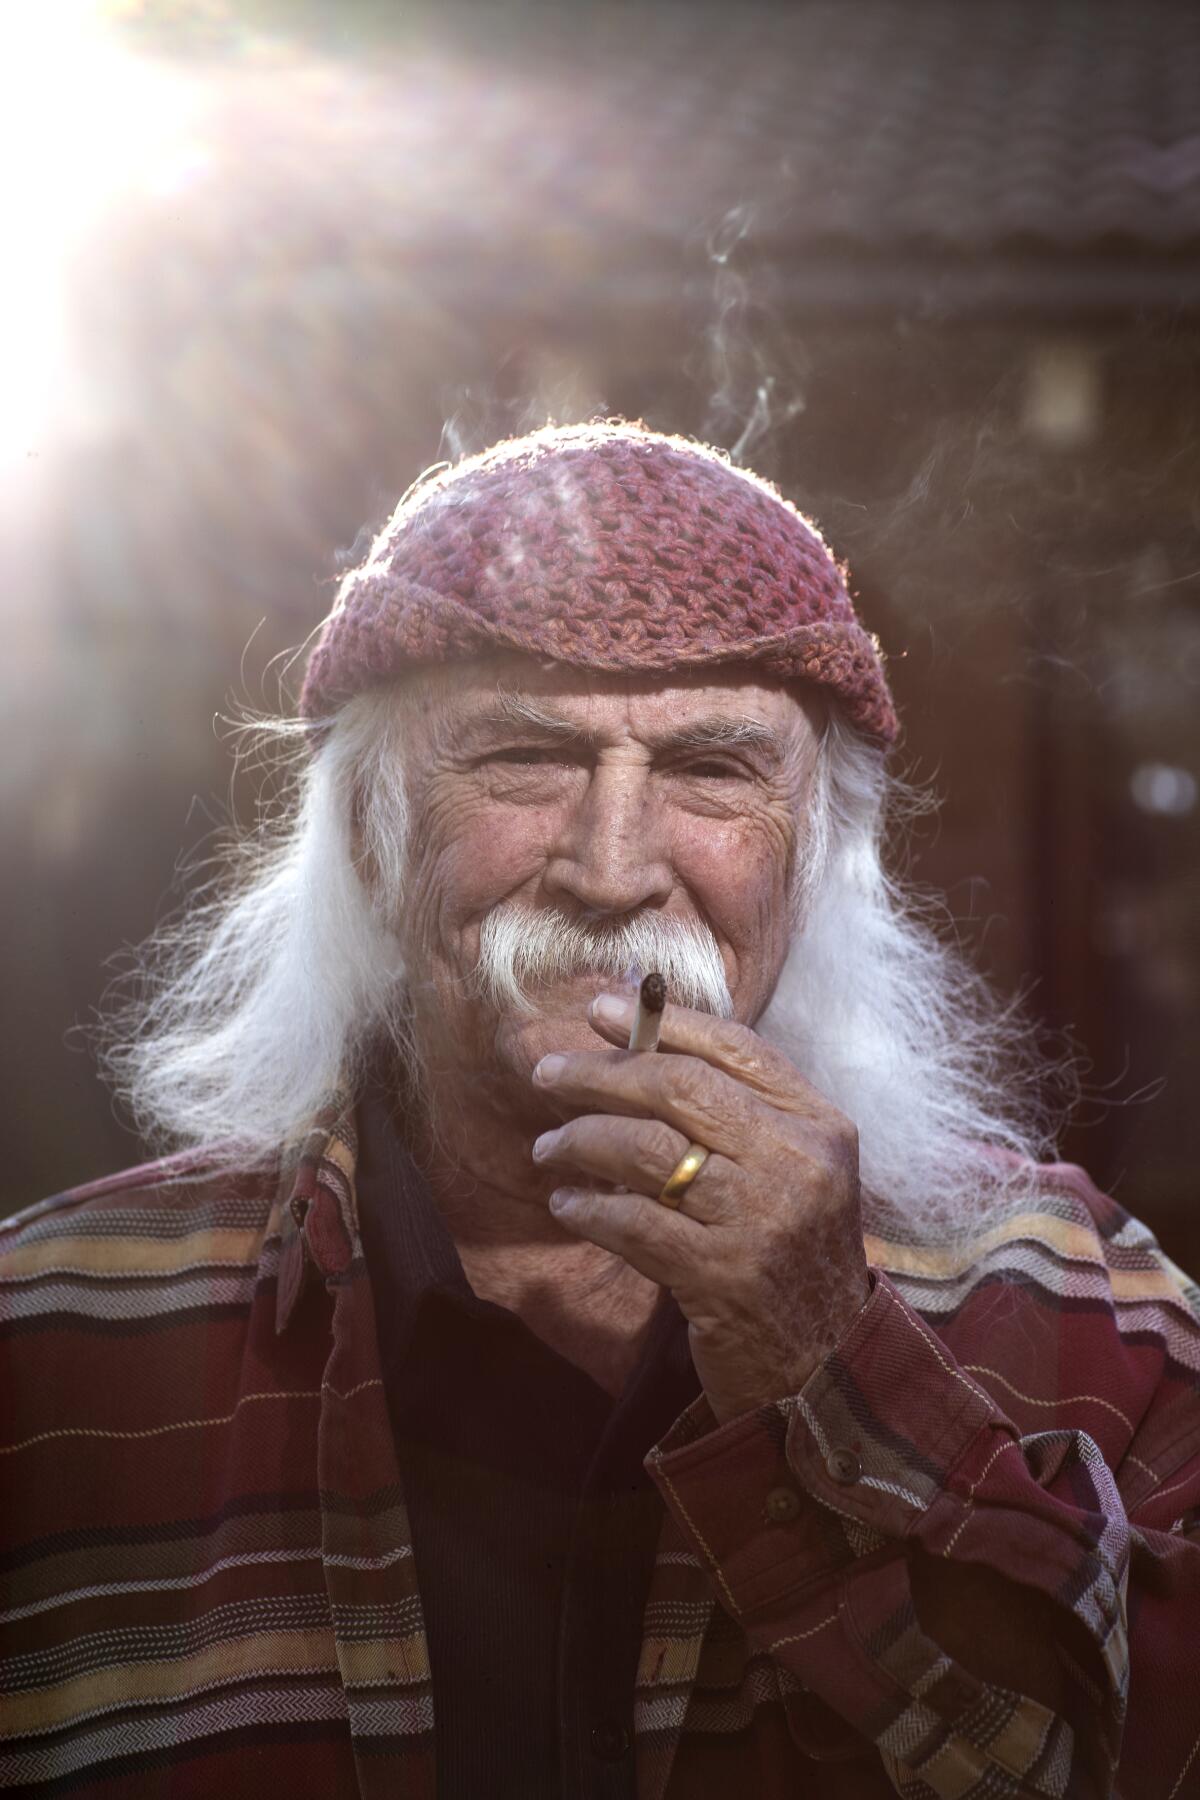 A man with long white hair and a mustache, smoking a cigarette